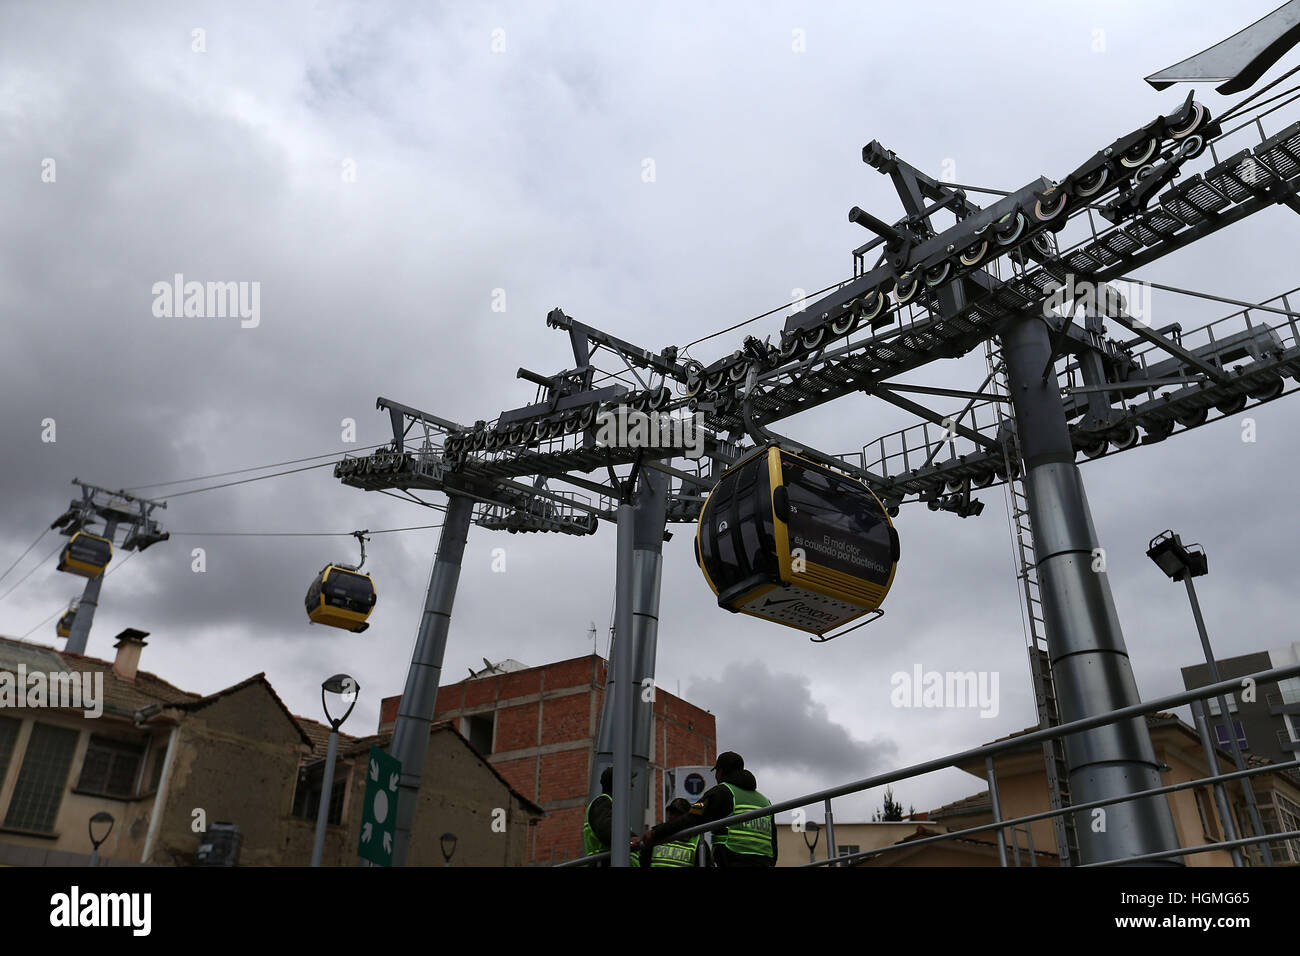 (17081) -- LA PAZ, Jan. 8, 2017 (XINHUA) -- Photo taken on Jan. 8, 2017 shows the cable cars of yellow line commuting in La Paz, capital of Bolivia. The aerial cable transport system linking the cities of La Paz and El Alto emerges as an alternative to public transport, given the growing demand of people in two cities. (Xinhua/Li Ming)(zf) Stock Photo